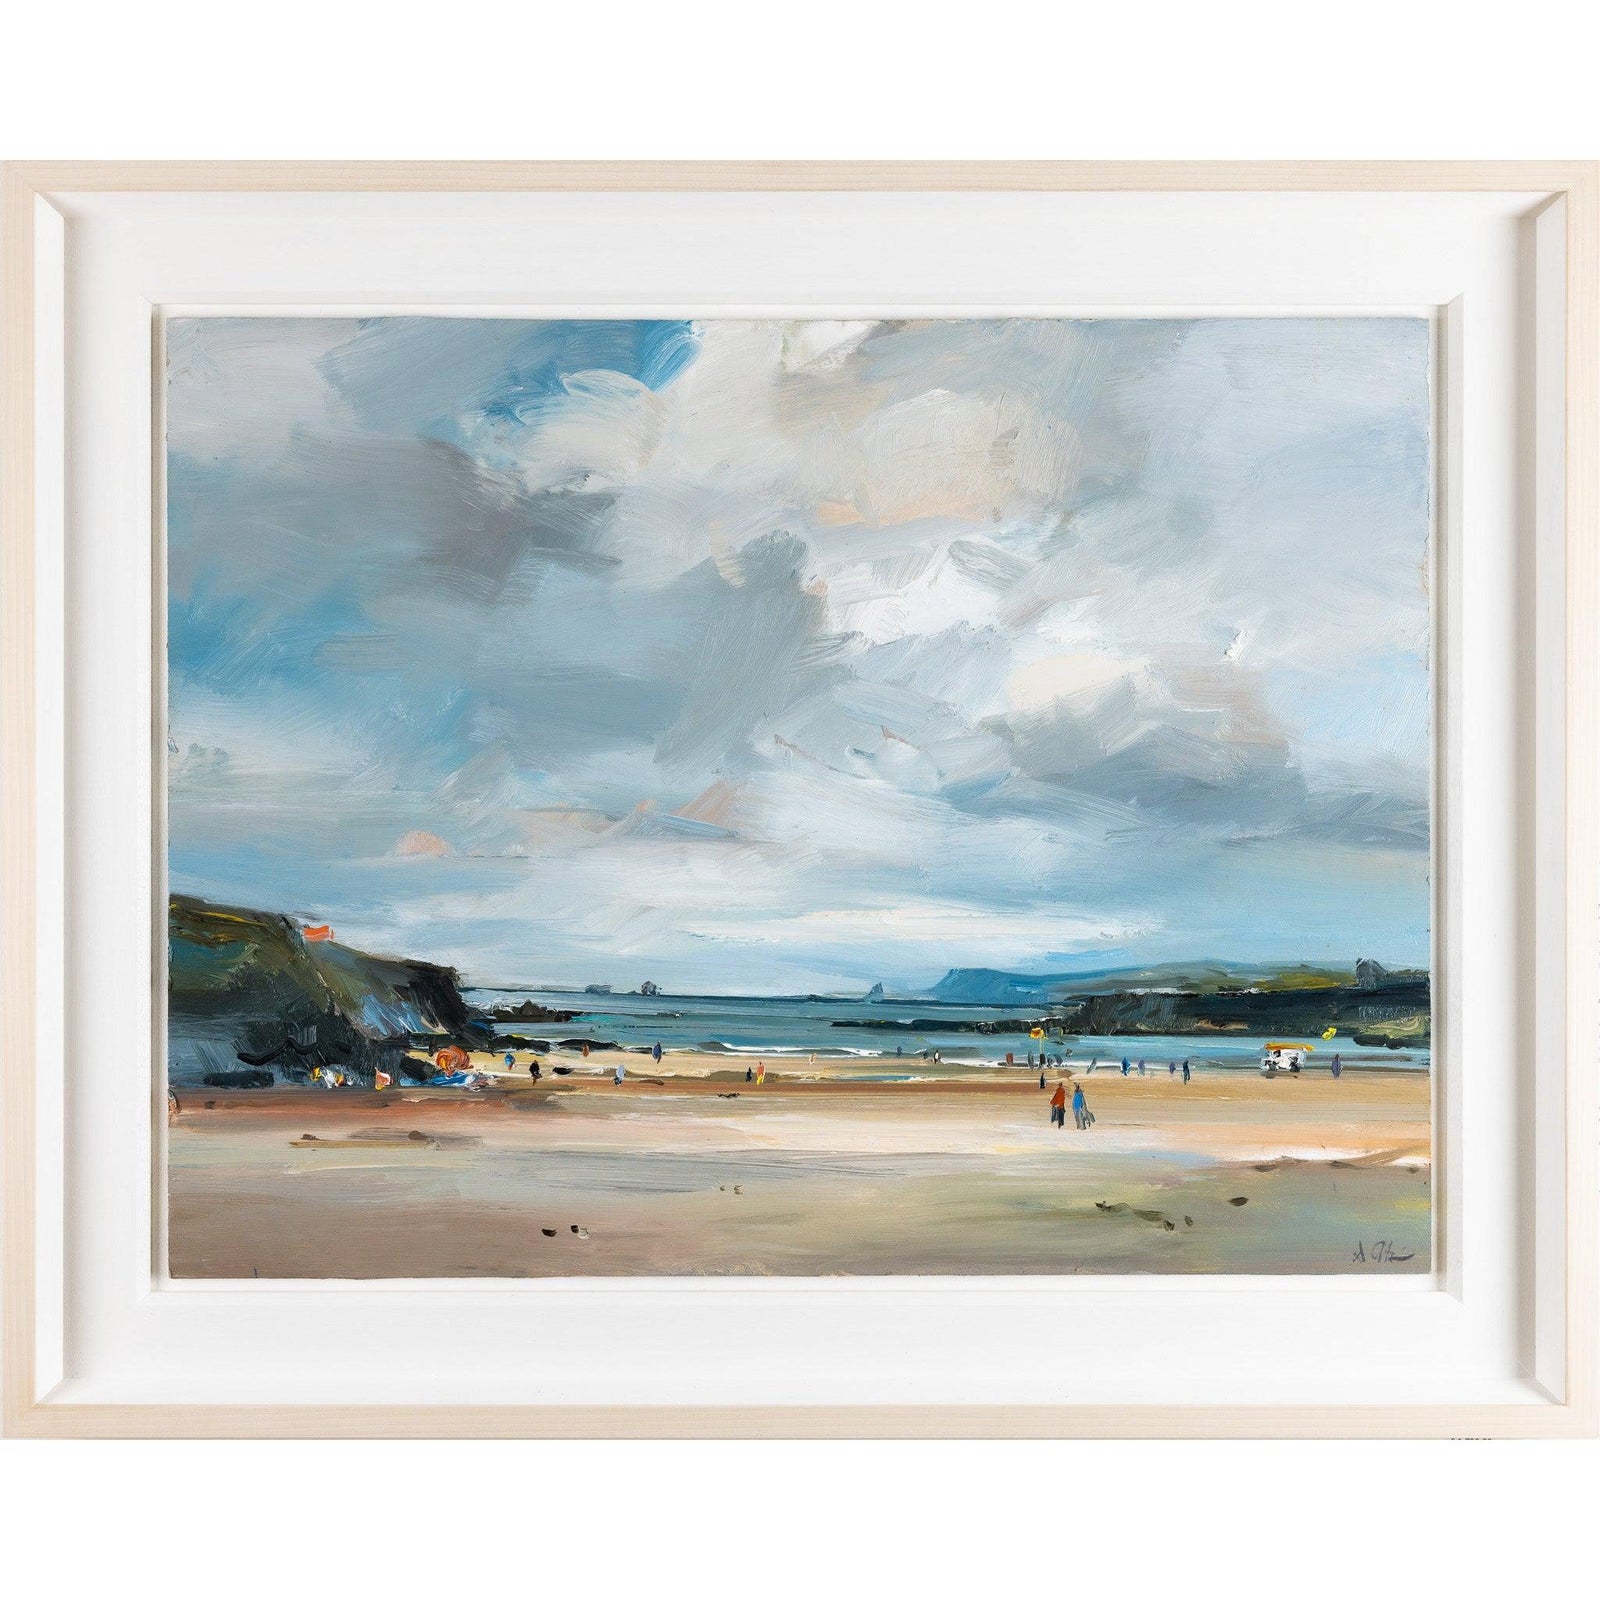 'Summers Day On Treyarnon Bay' oil on board original by David Atkins, available at Padstow Gallery, Cornwall